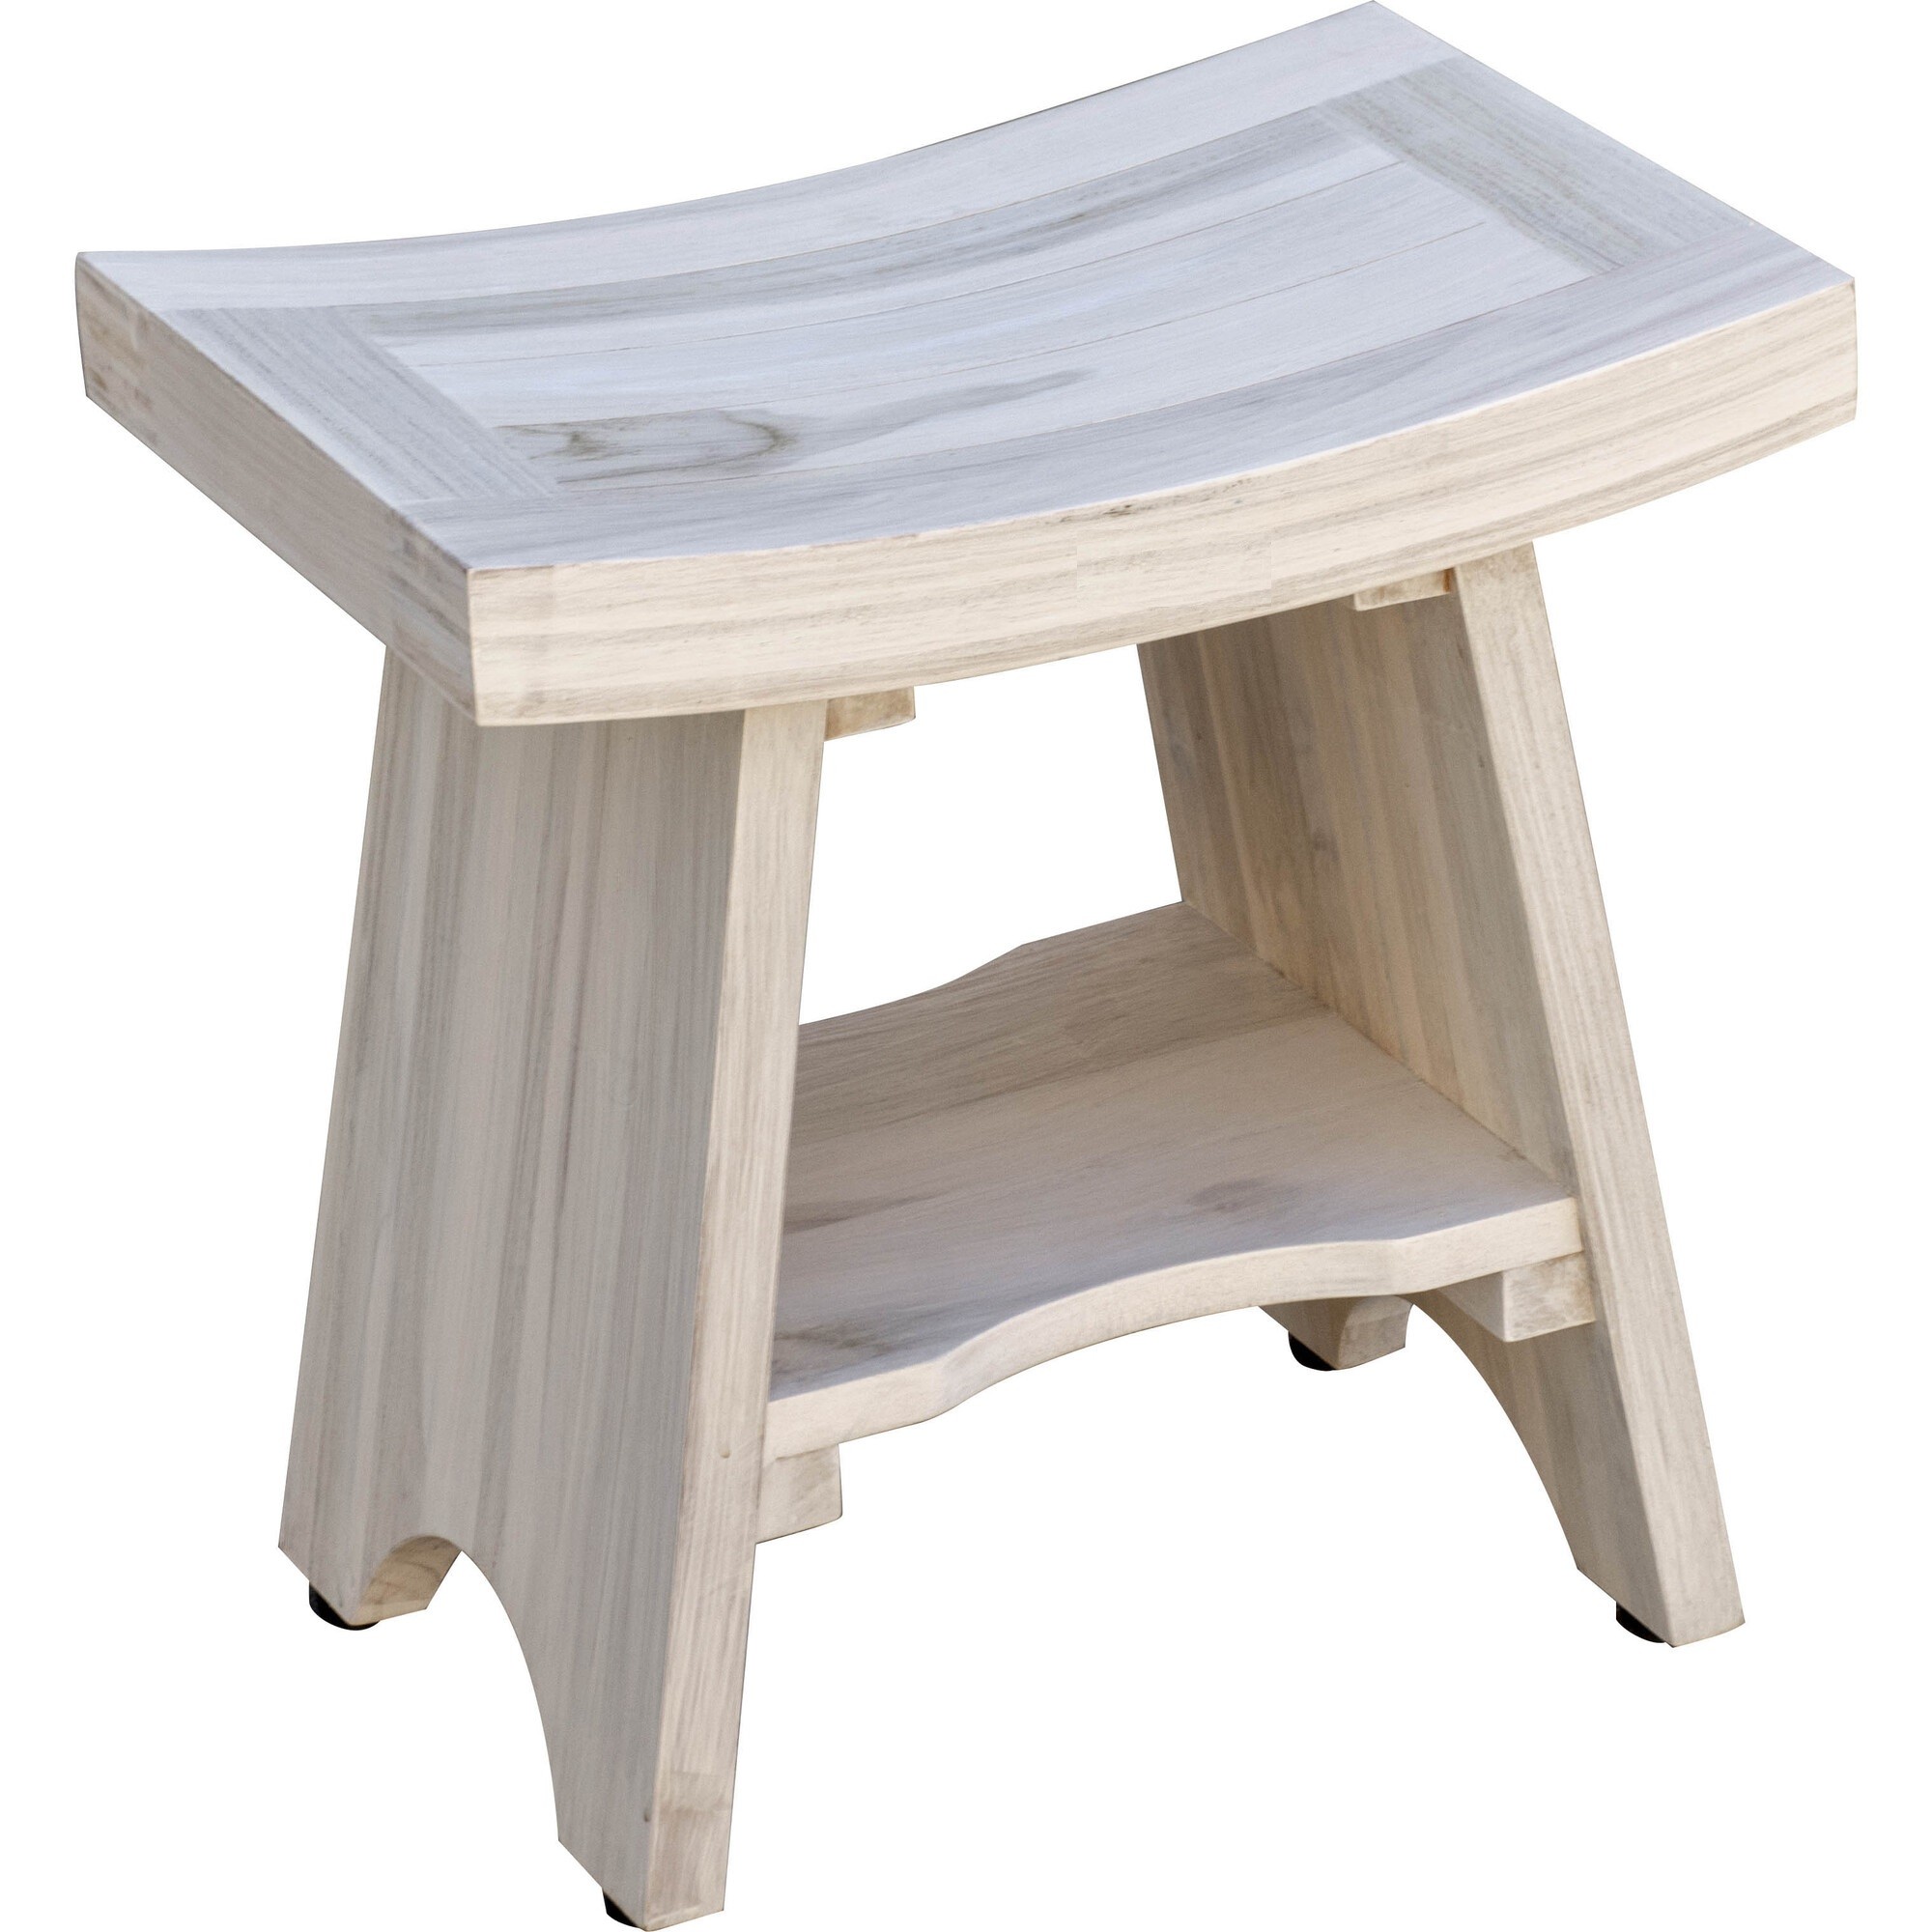 Compact Curvilinear Teak Shower Outdoor Bench with Shelf in Driftwood Finish